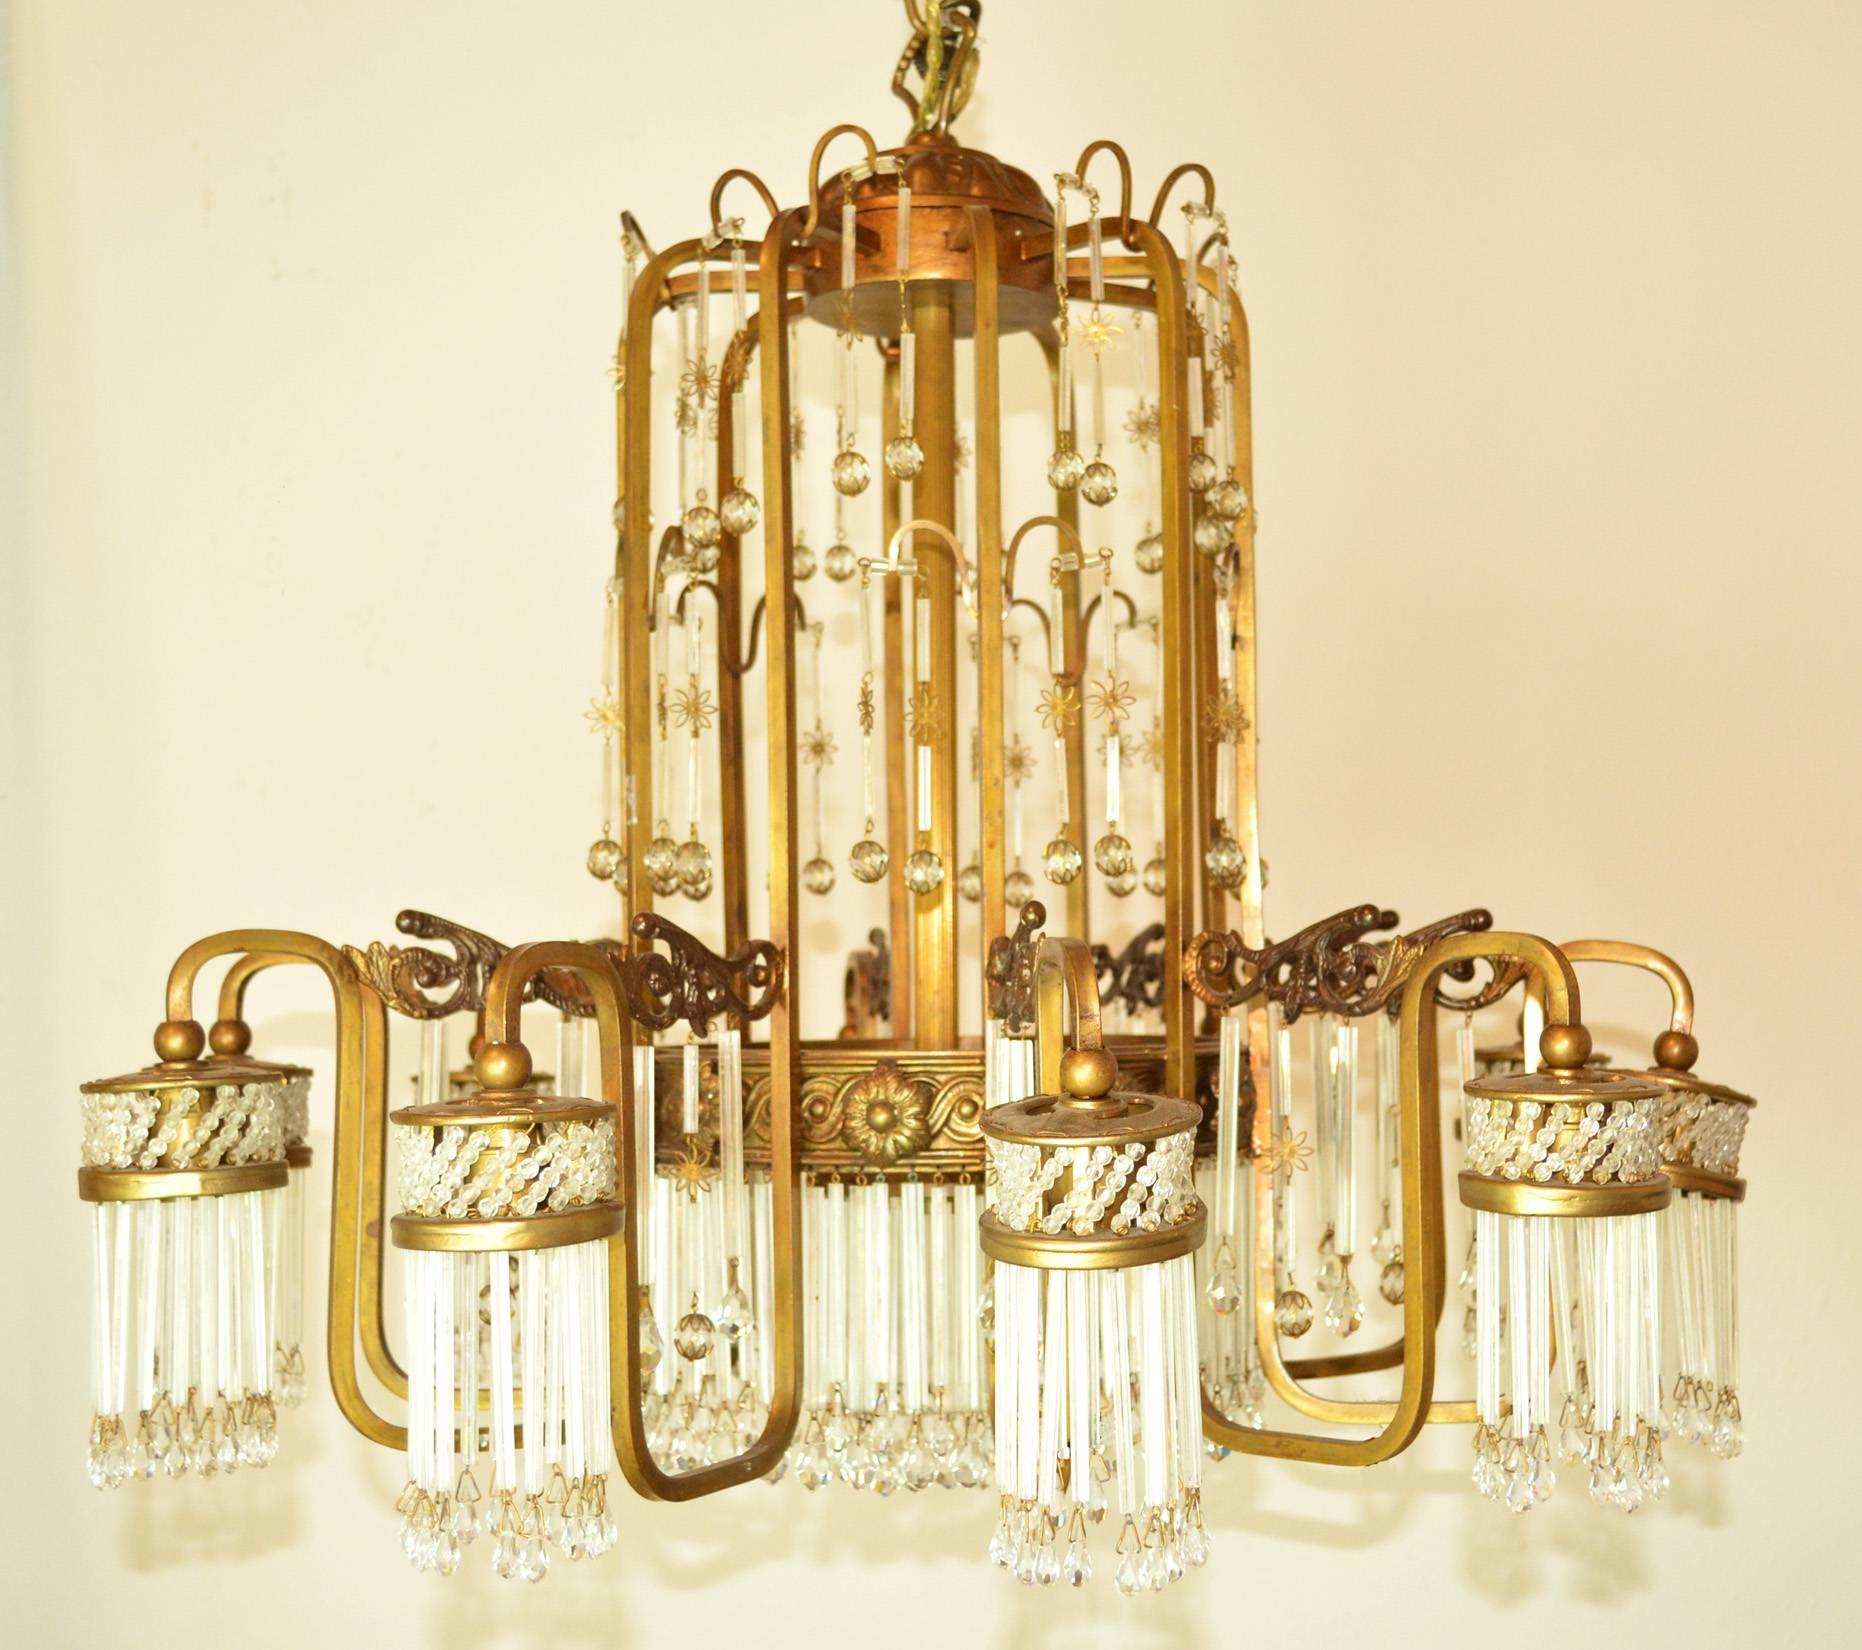 An Art Deco chandelier with a gold tone metal frame with cascading glass rods and beads. Ten lights, each surrounded by glass rods.